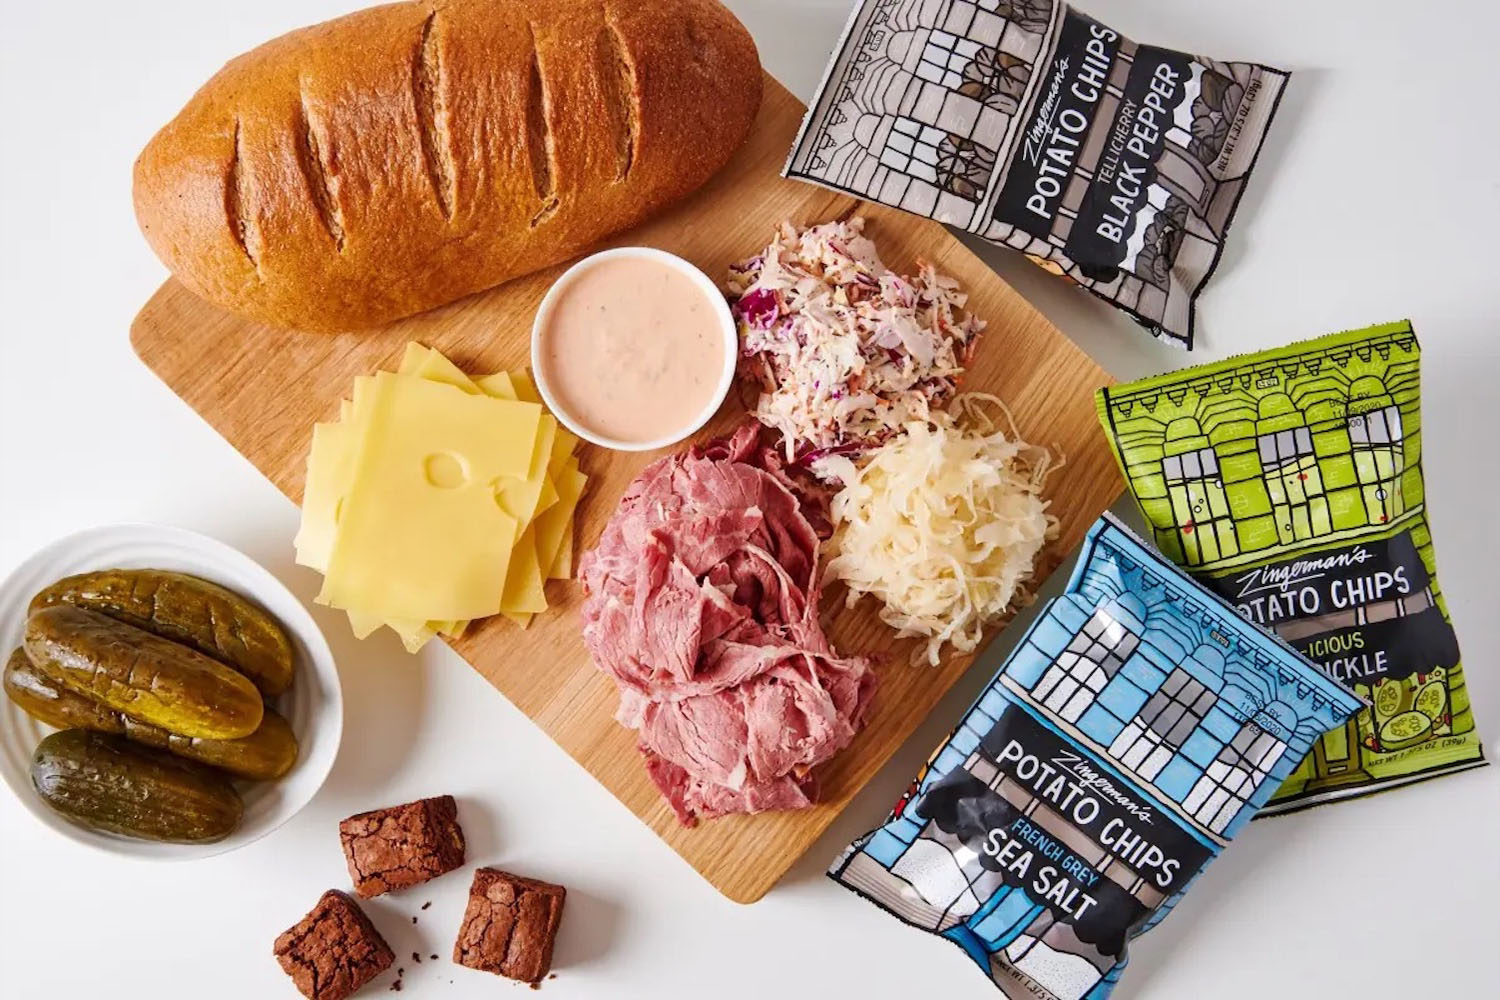 a collage of sandwich items on a white table from Zingerman's